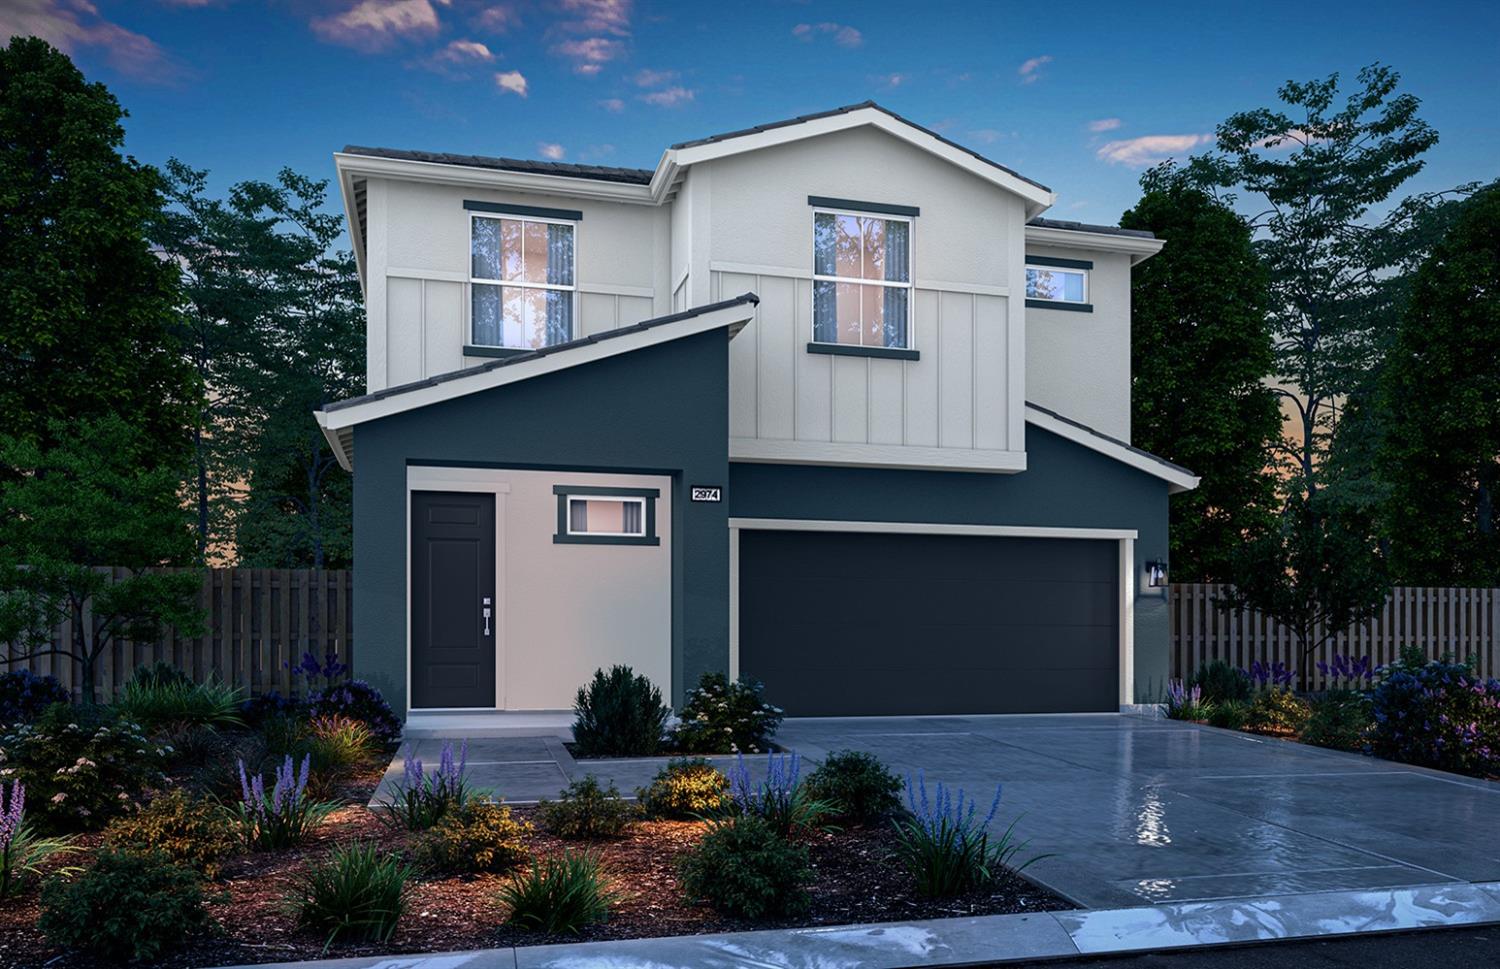 QUICK MOVE-IN! This Beautiful New Home is located in the Montelena Community in Rancho Cordova. This